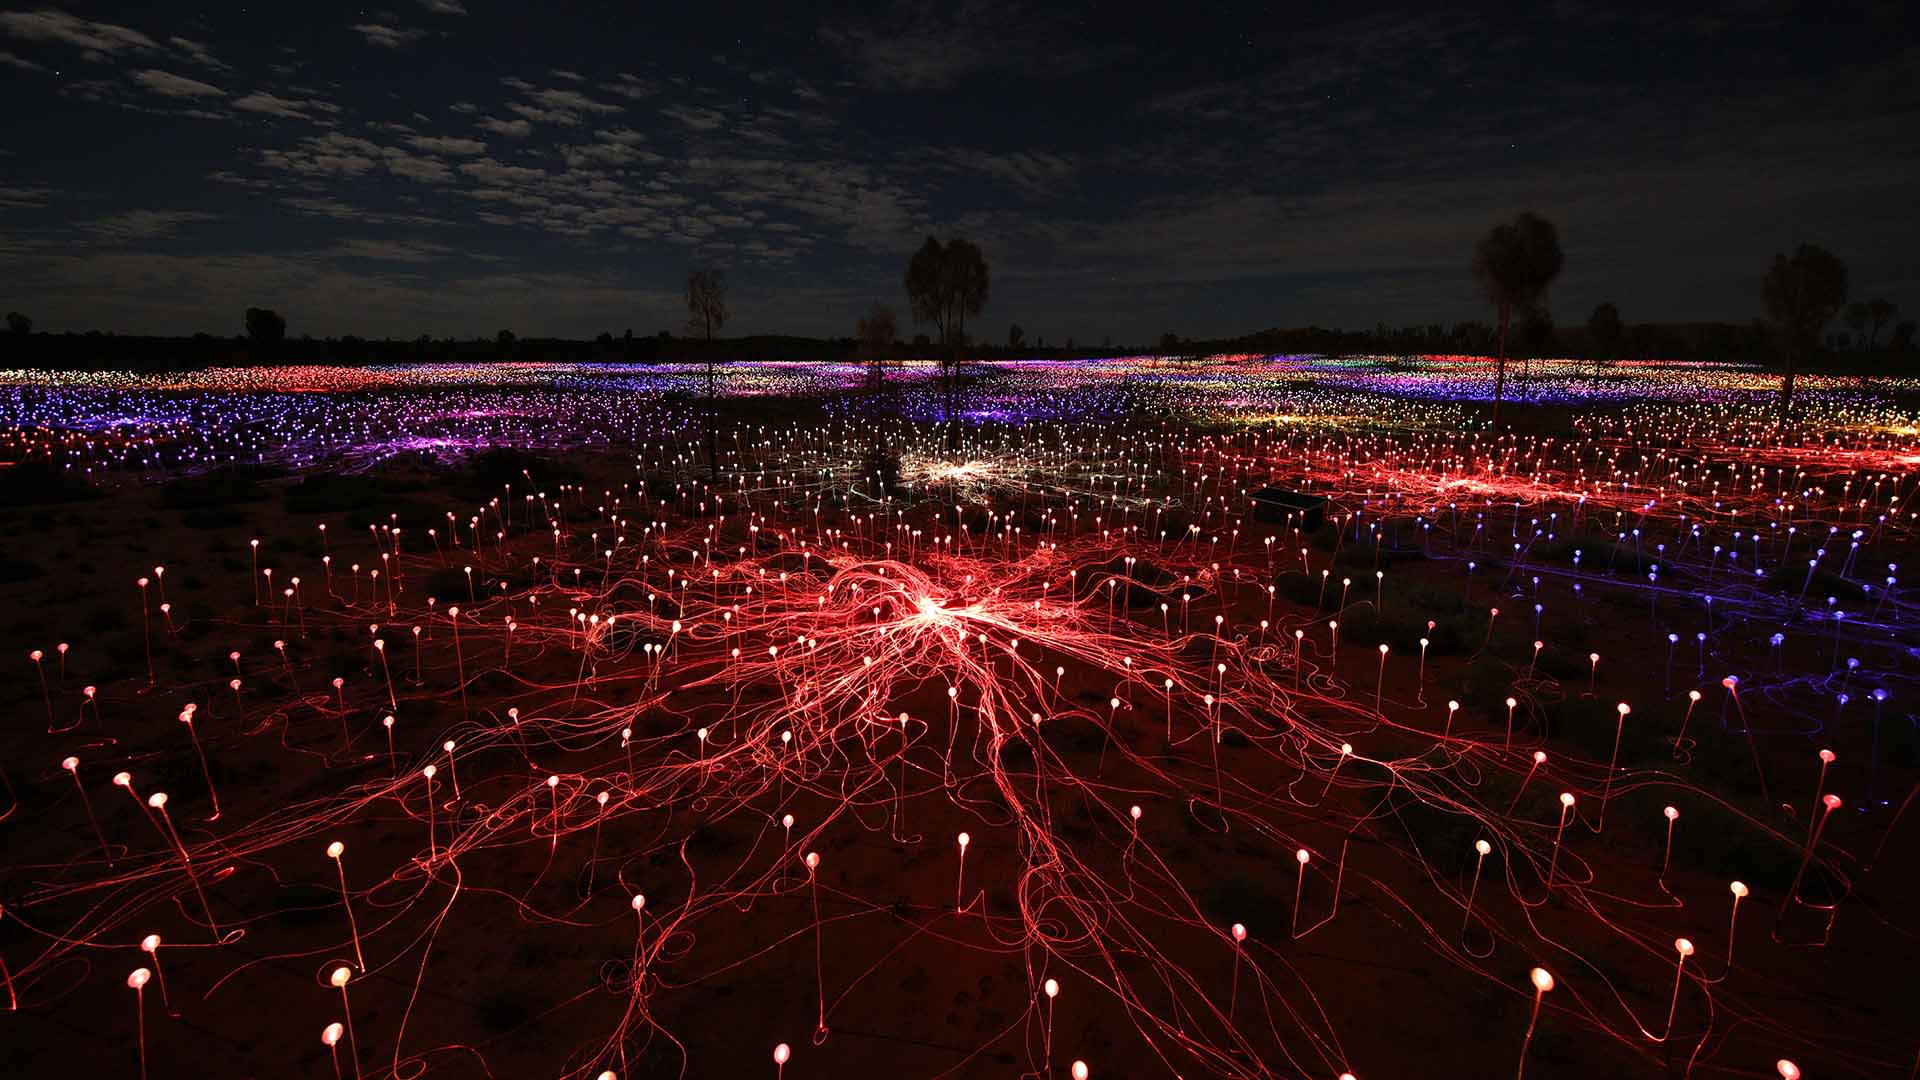 Uluru's Incredible 'Field of Light' Installation Has Been Extended Indefinitely